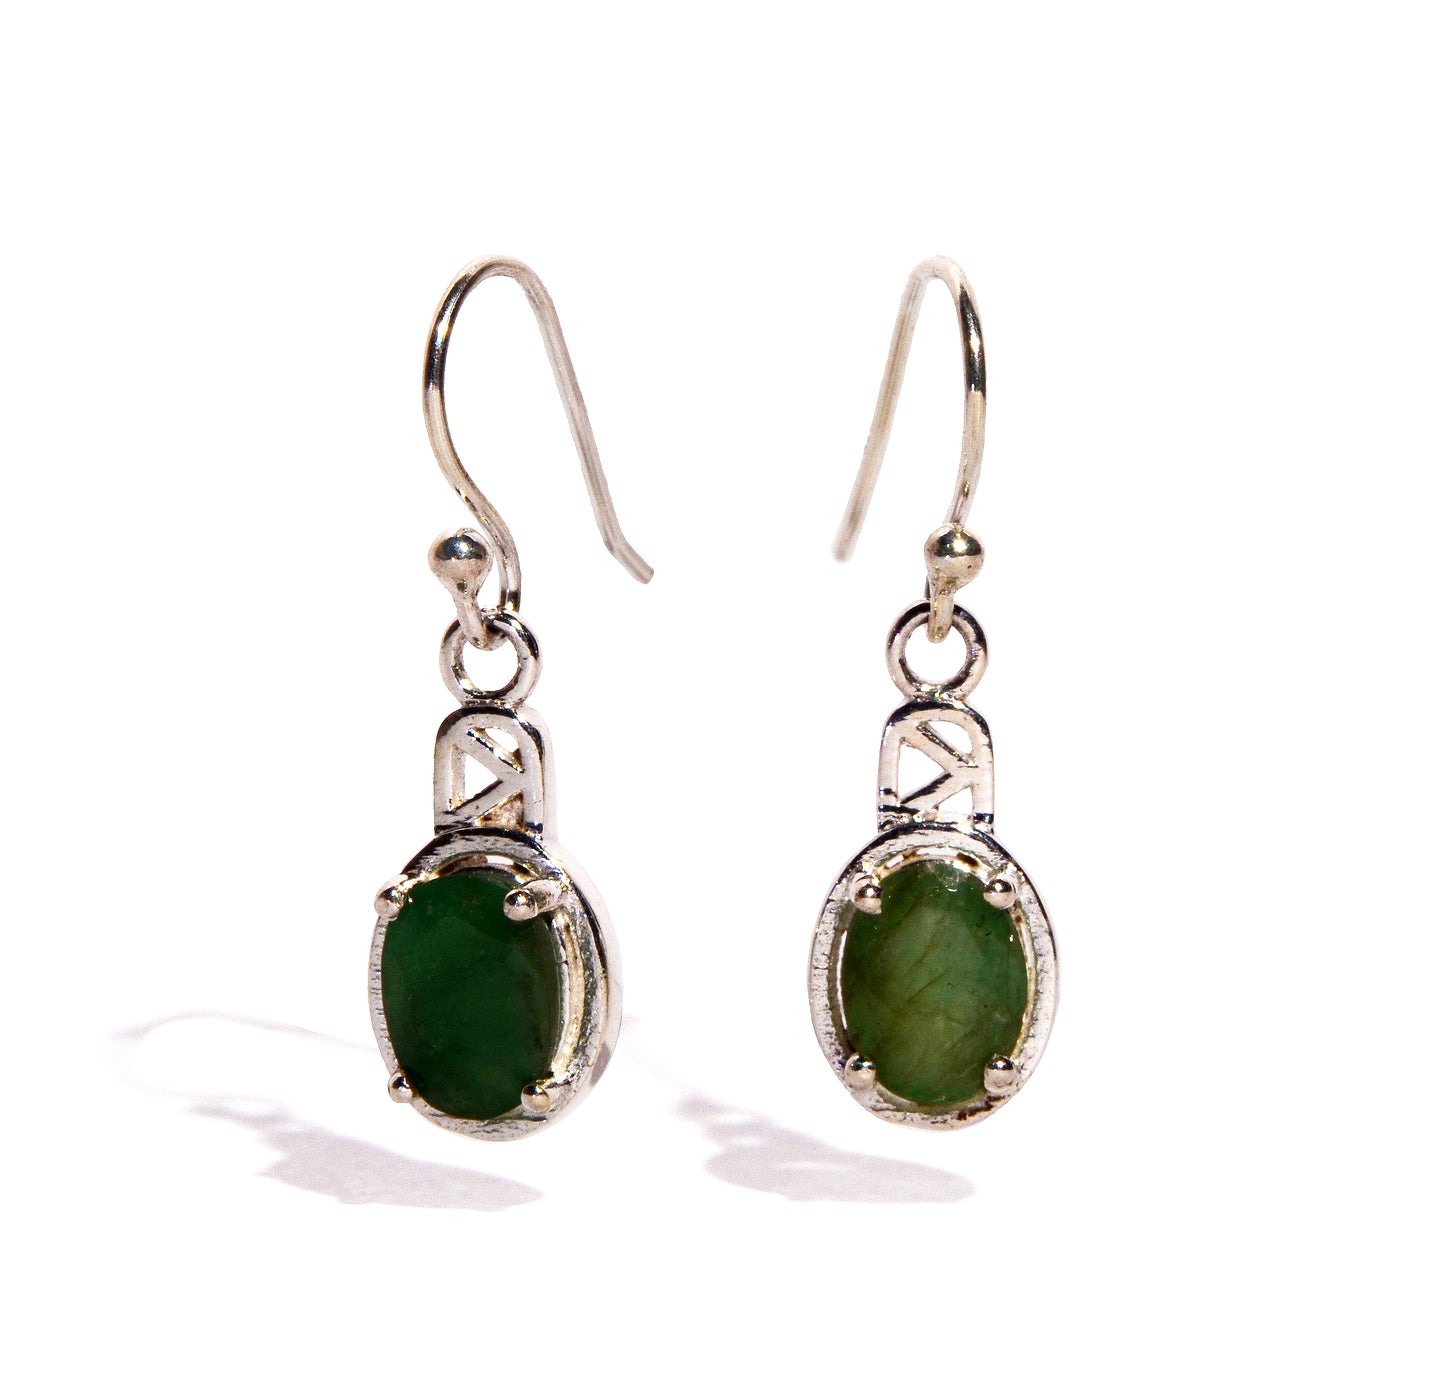 Emerald Sterling Silver Earrings - Oval Crystals